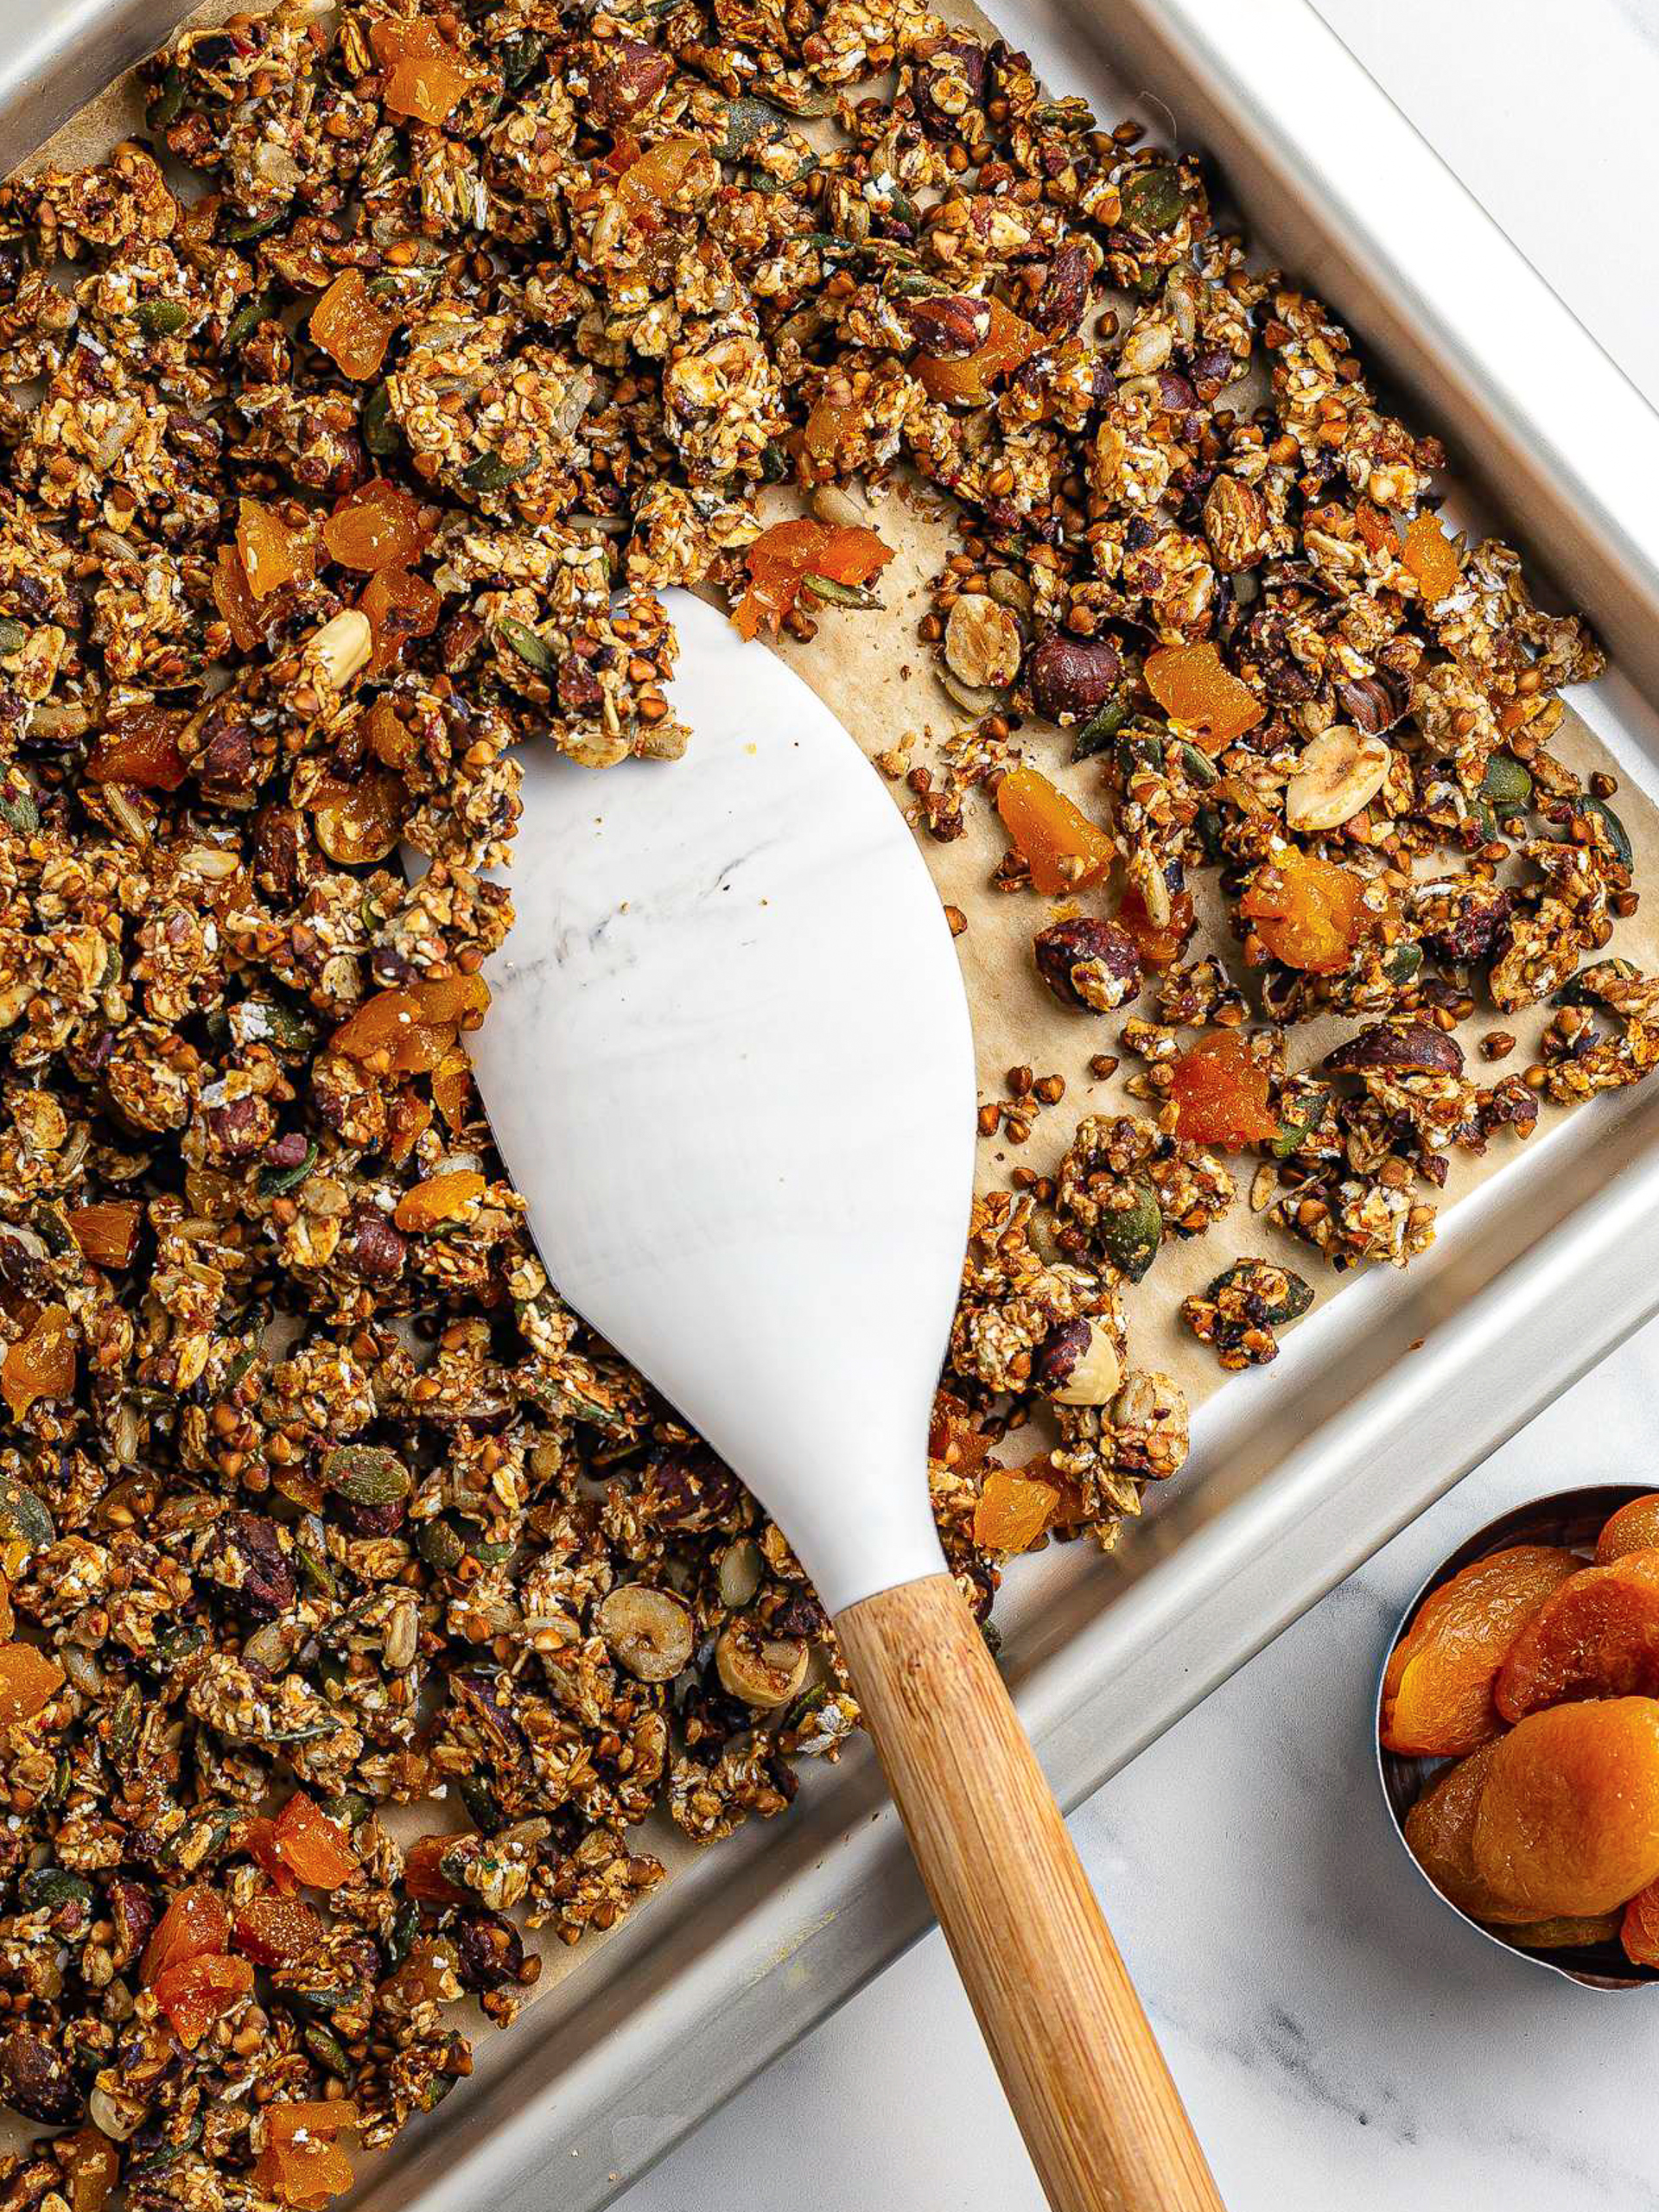 Is Granola Really Healthy?